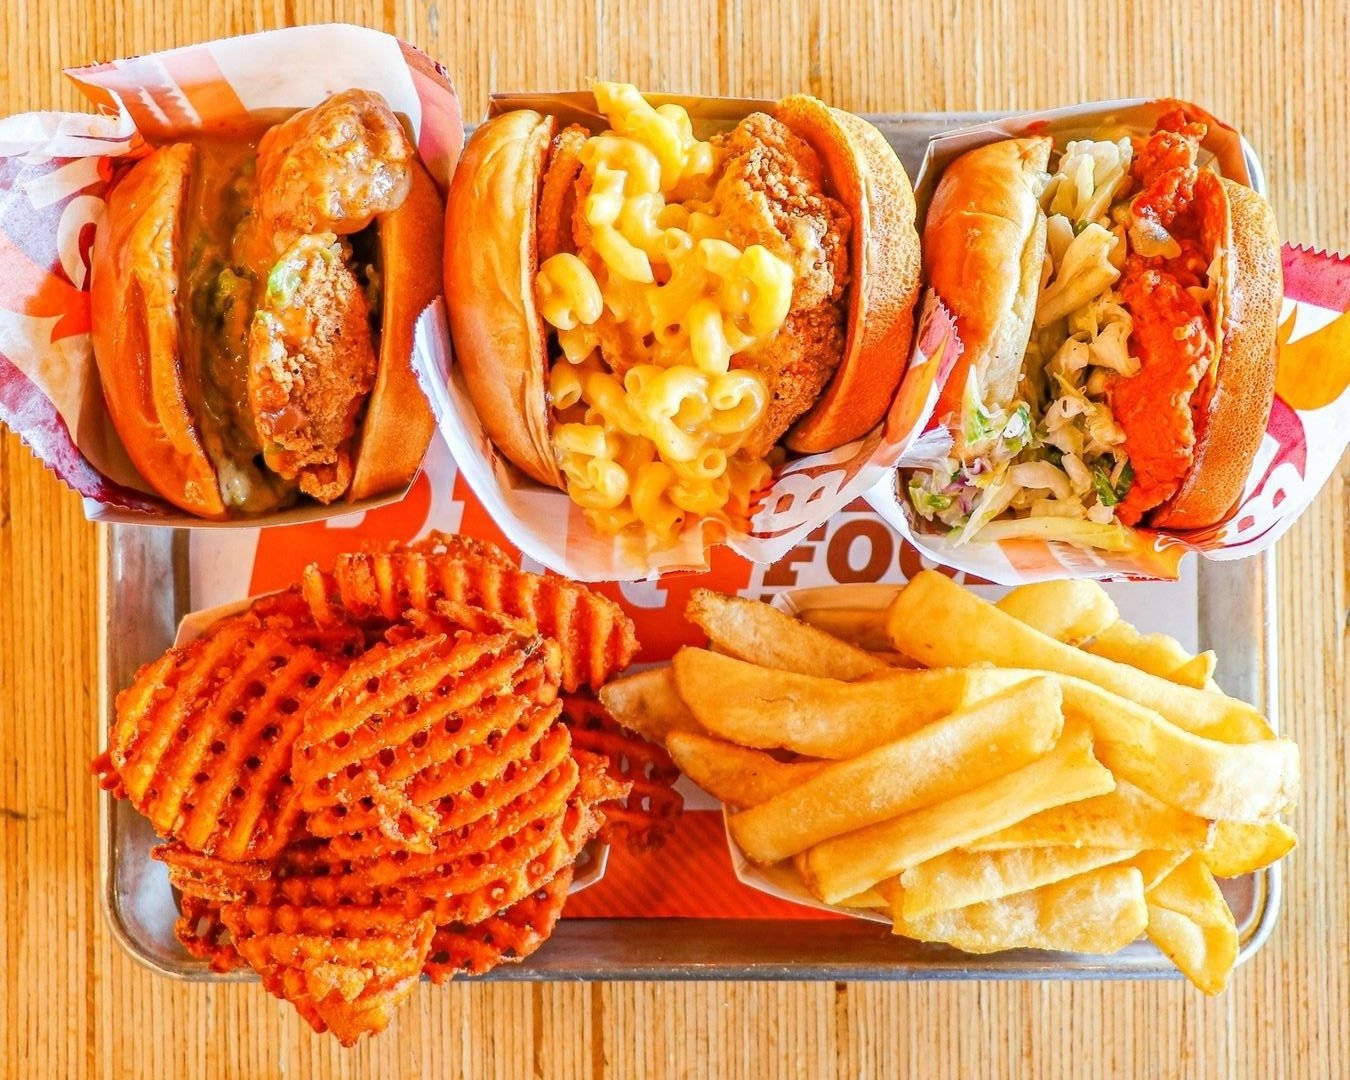 An Extra-large Feast - High Servings Of Fast Food